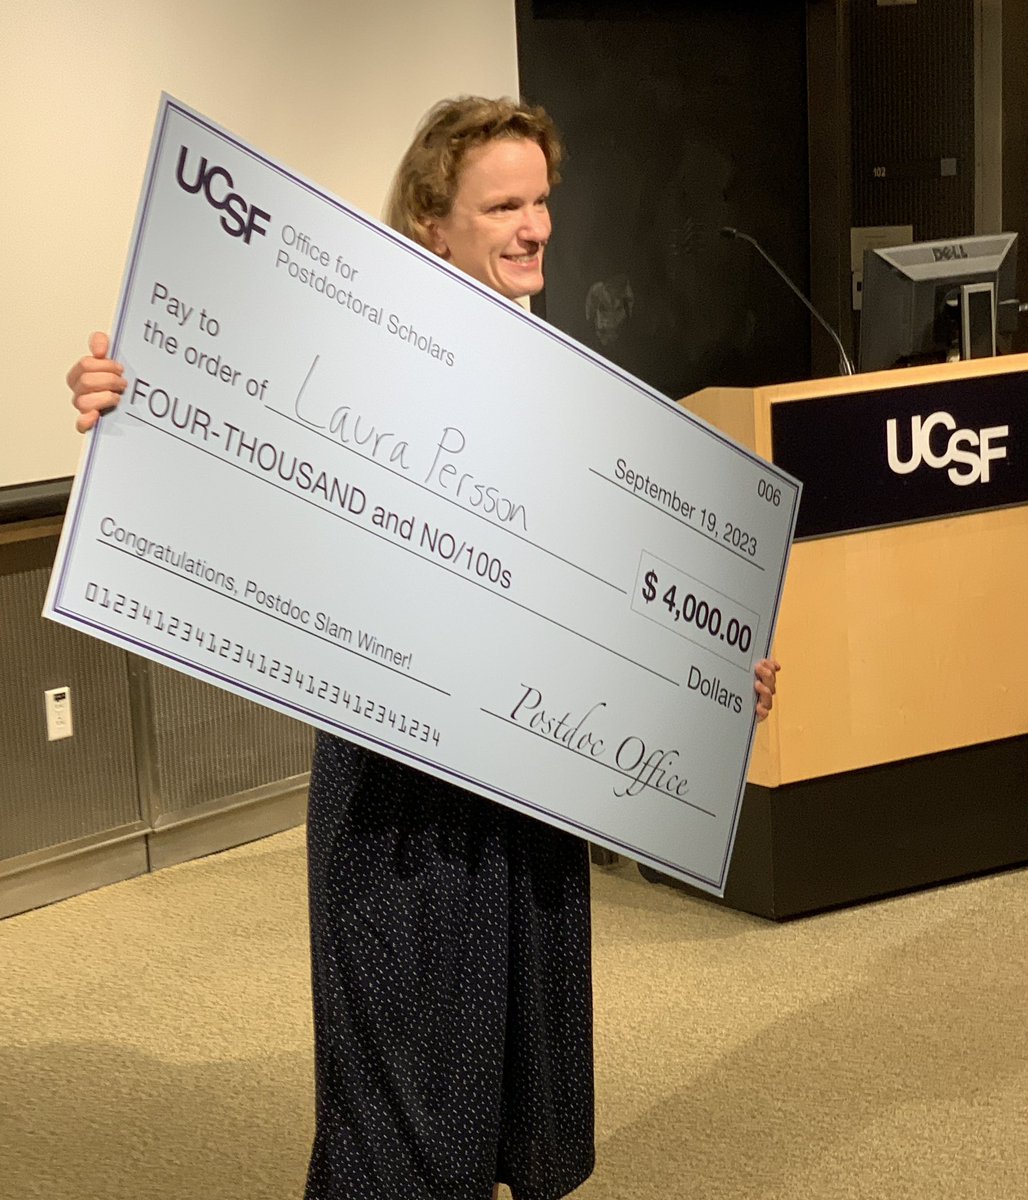 Dr Laura Persson of our lab just won People’s Choice AND First Place in the #UCSF Postdoc Slam! She spoke of that unexpected “thing” that makes you want to devote your every waking thought to figuring out what the hell you just saw… she calls it Wormnado! #Science #postdoc #worm